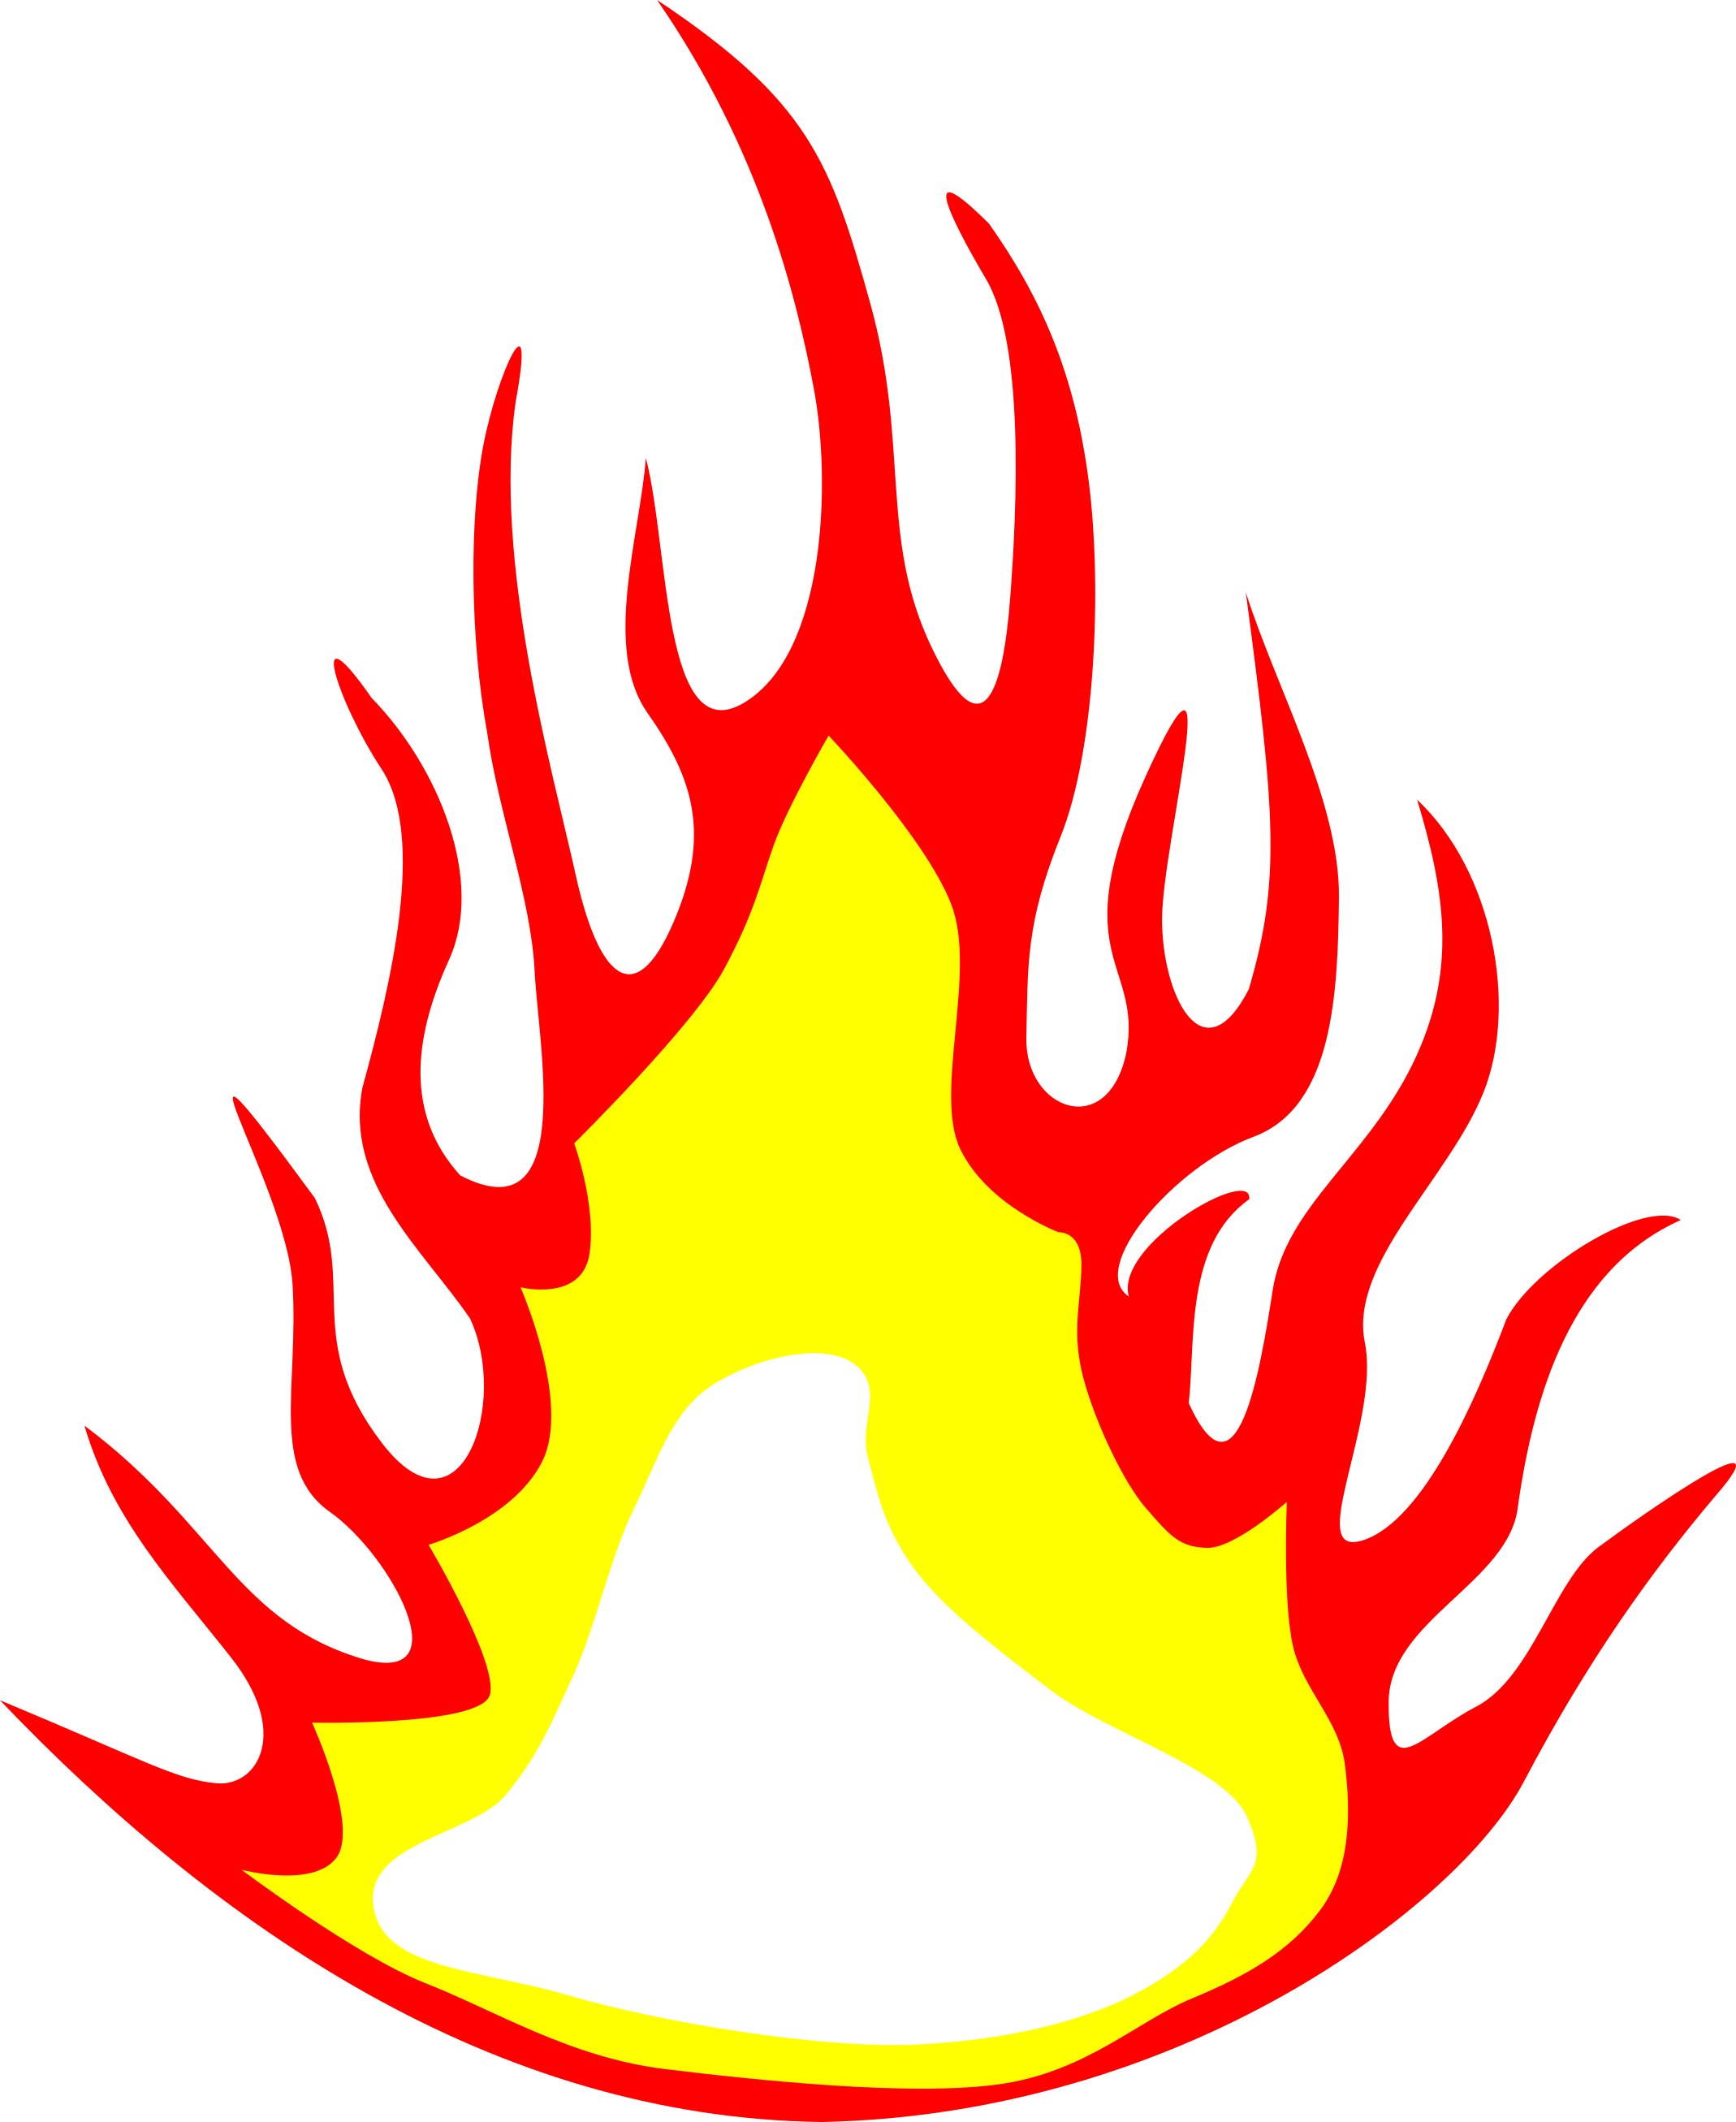 Flames Clipart Flames Clipart Vector Free Clipart On - Flames Clipart Flames Clipart Vector Free Clipart On (2138x2613)